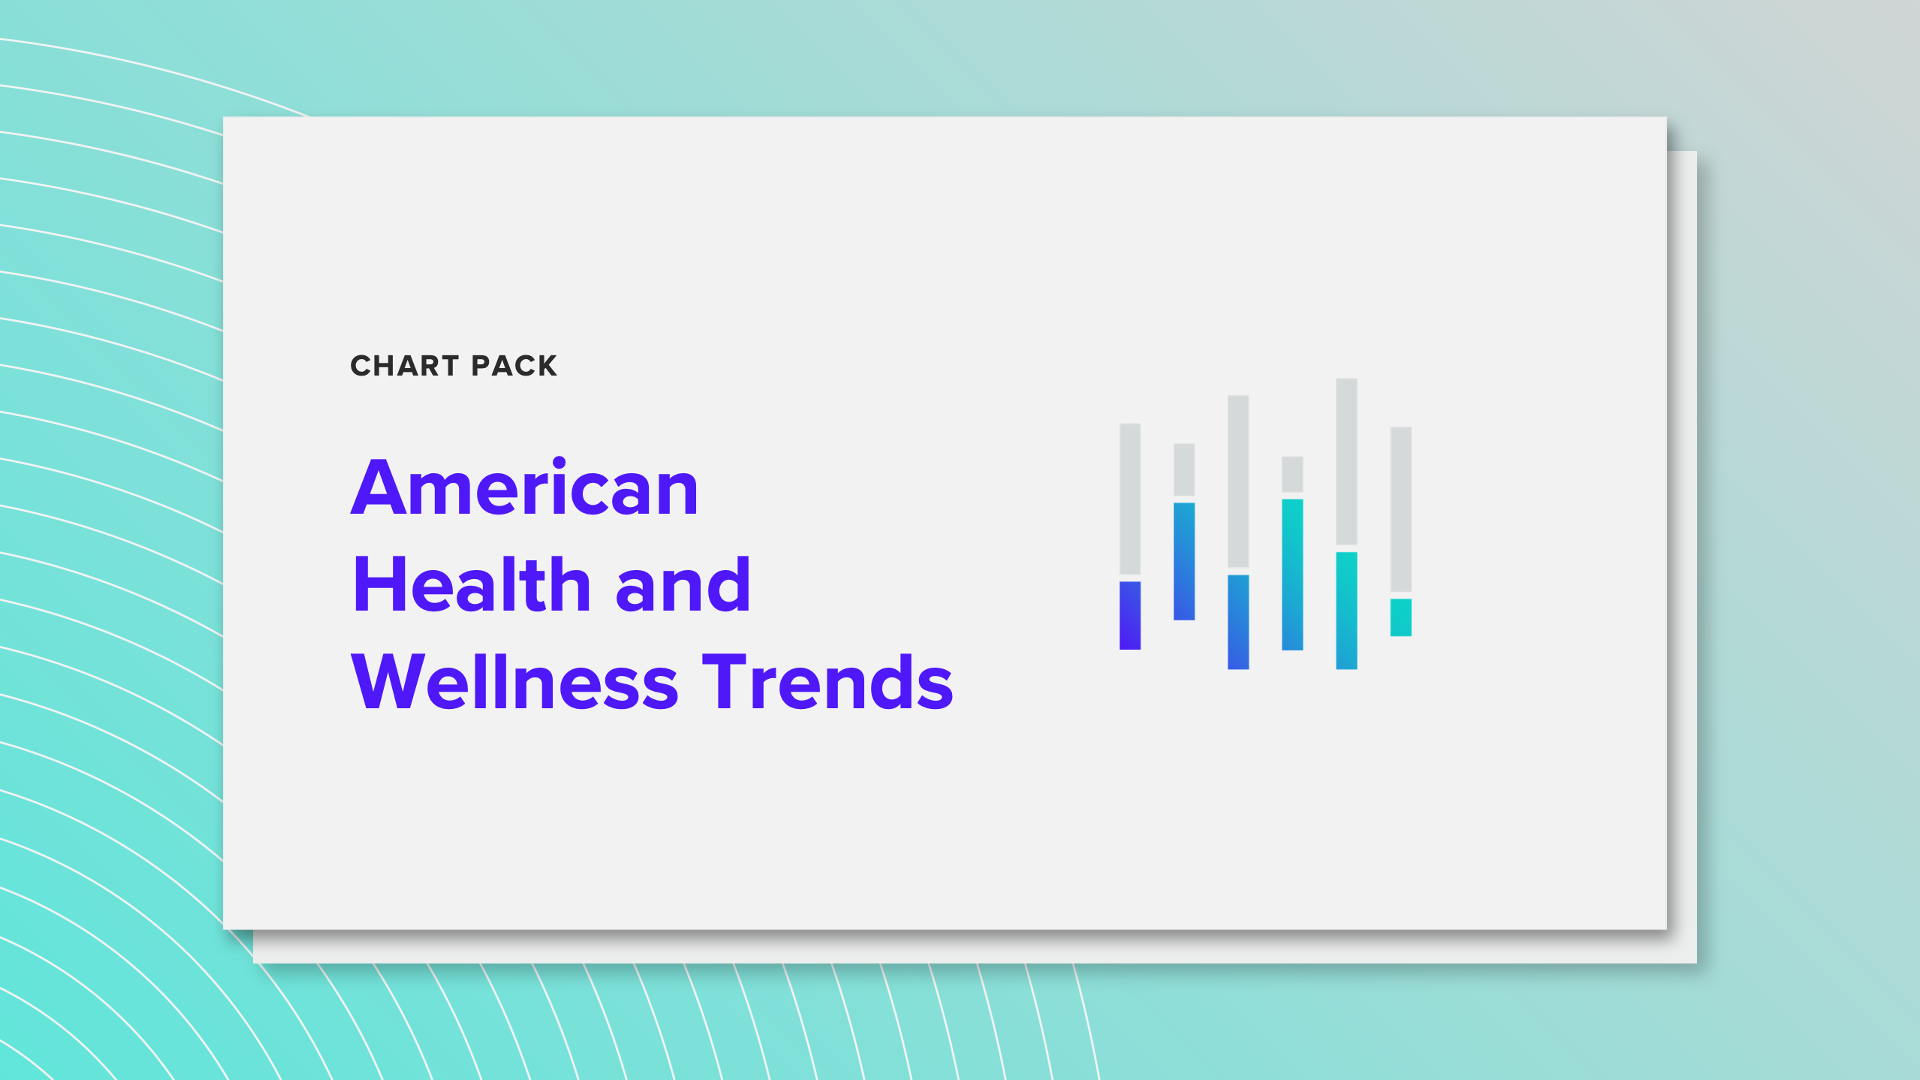 Download the Chart Pack: American Health and Wellness Trends